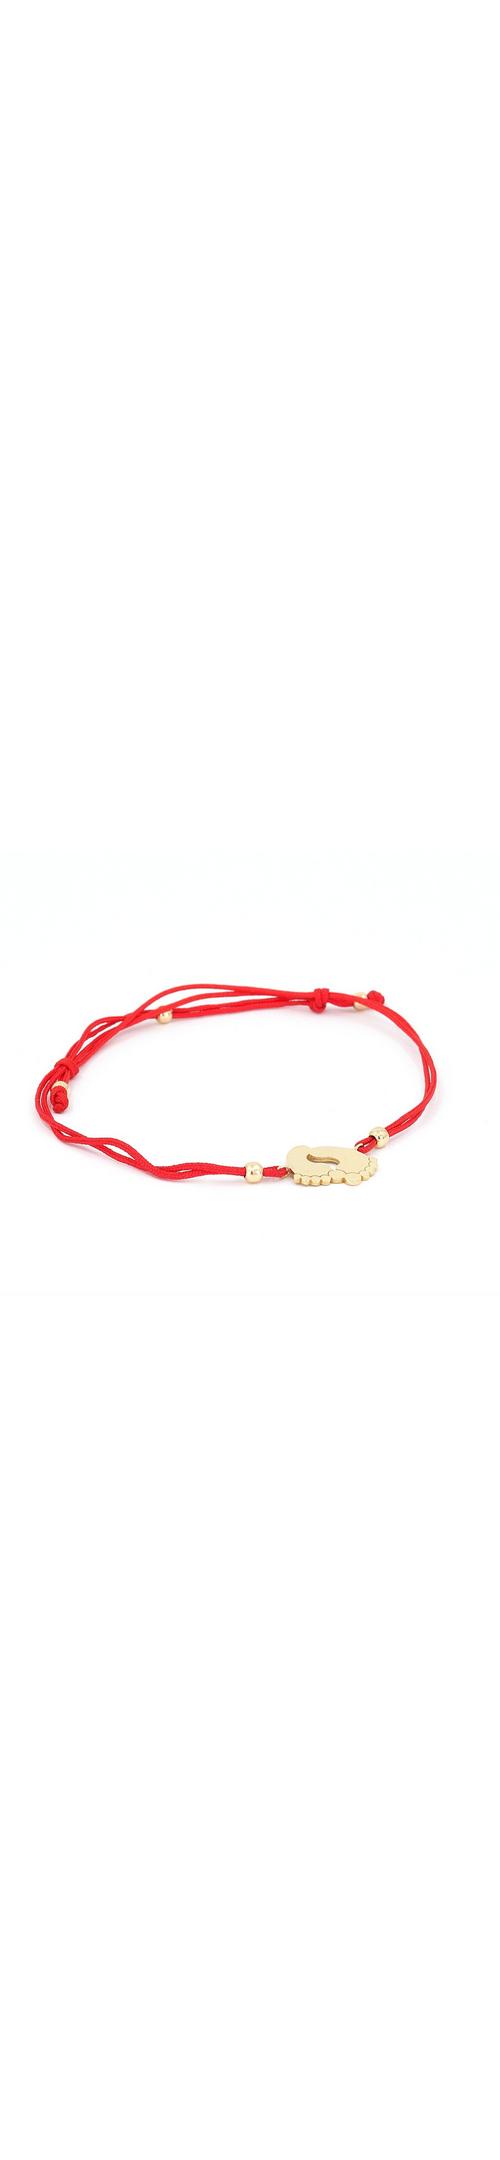 Red cord bracelet with 14K yellow gold baby feet charm